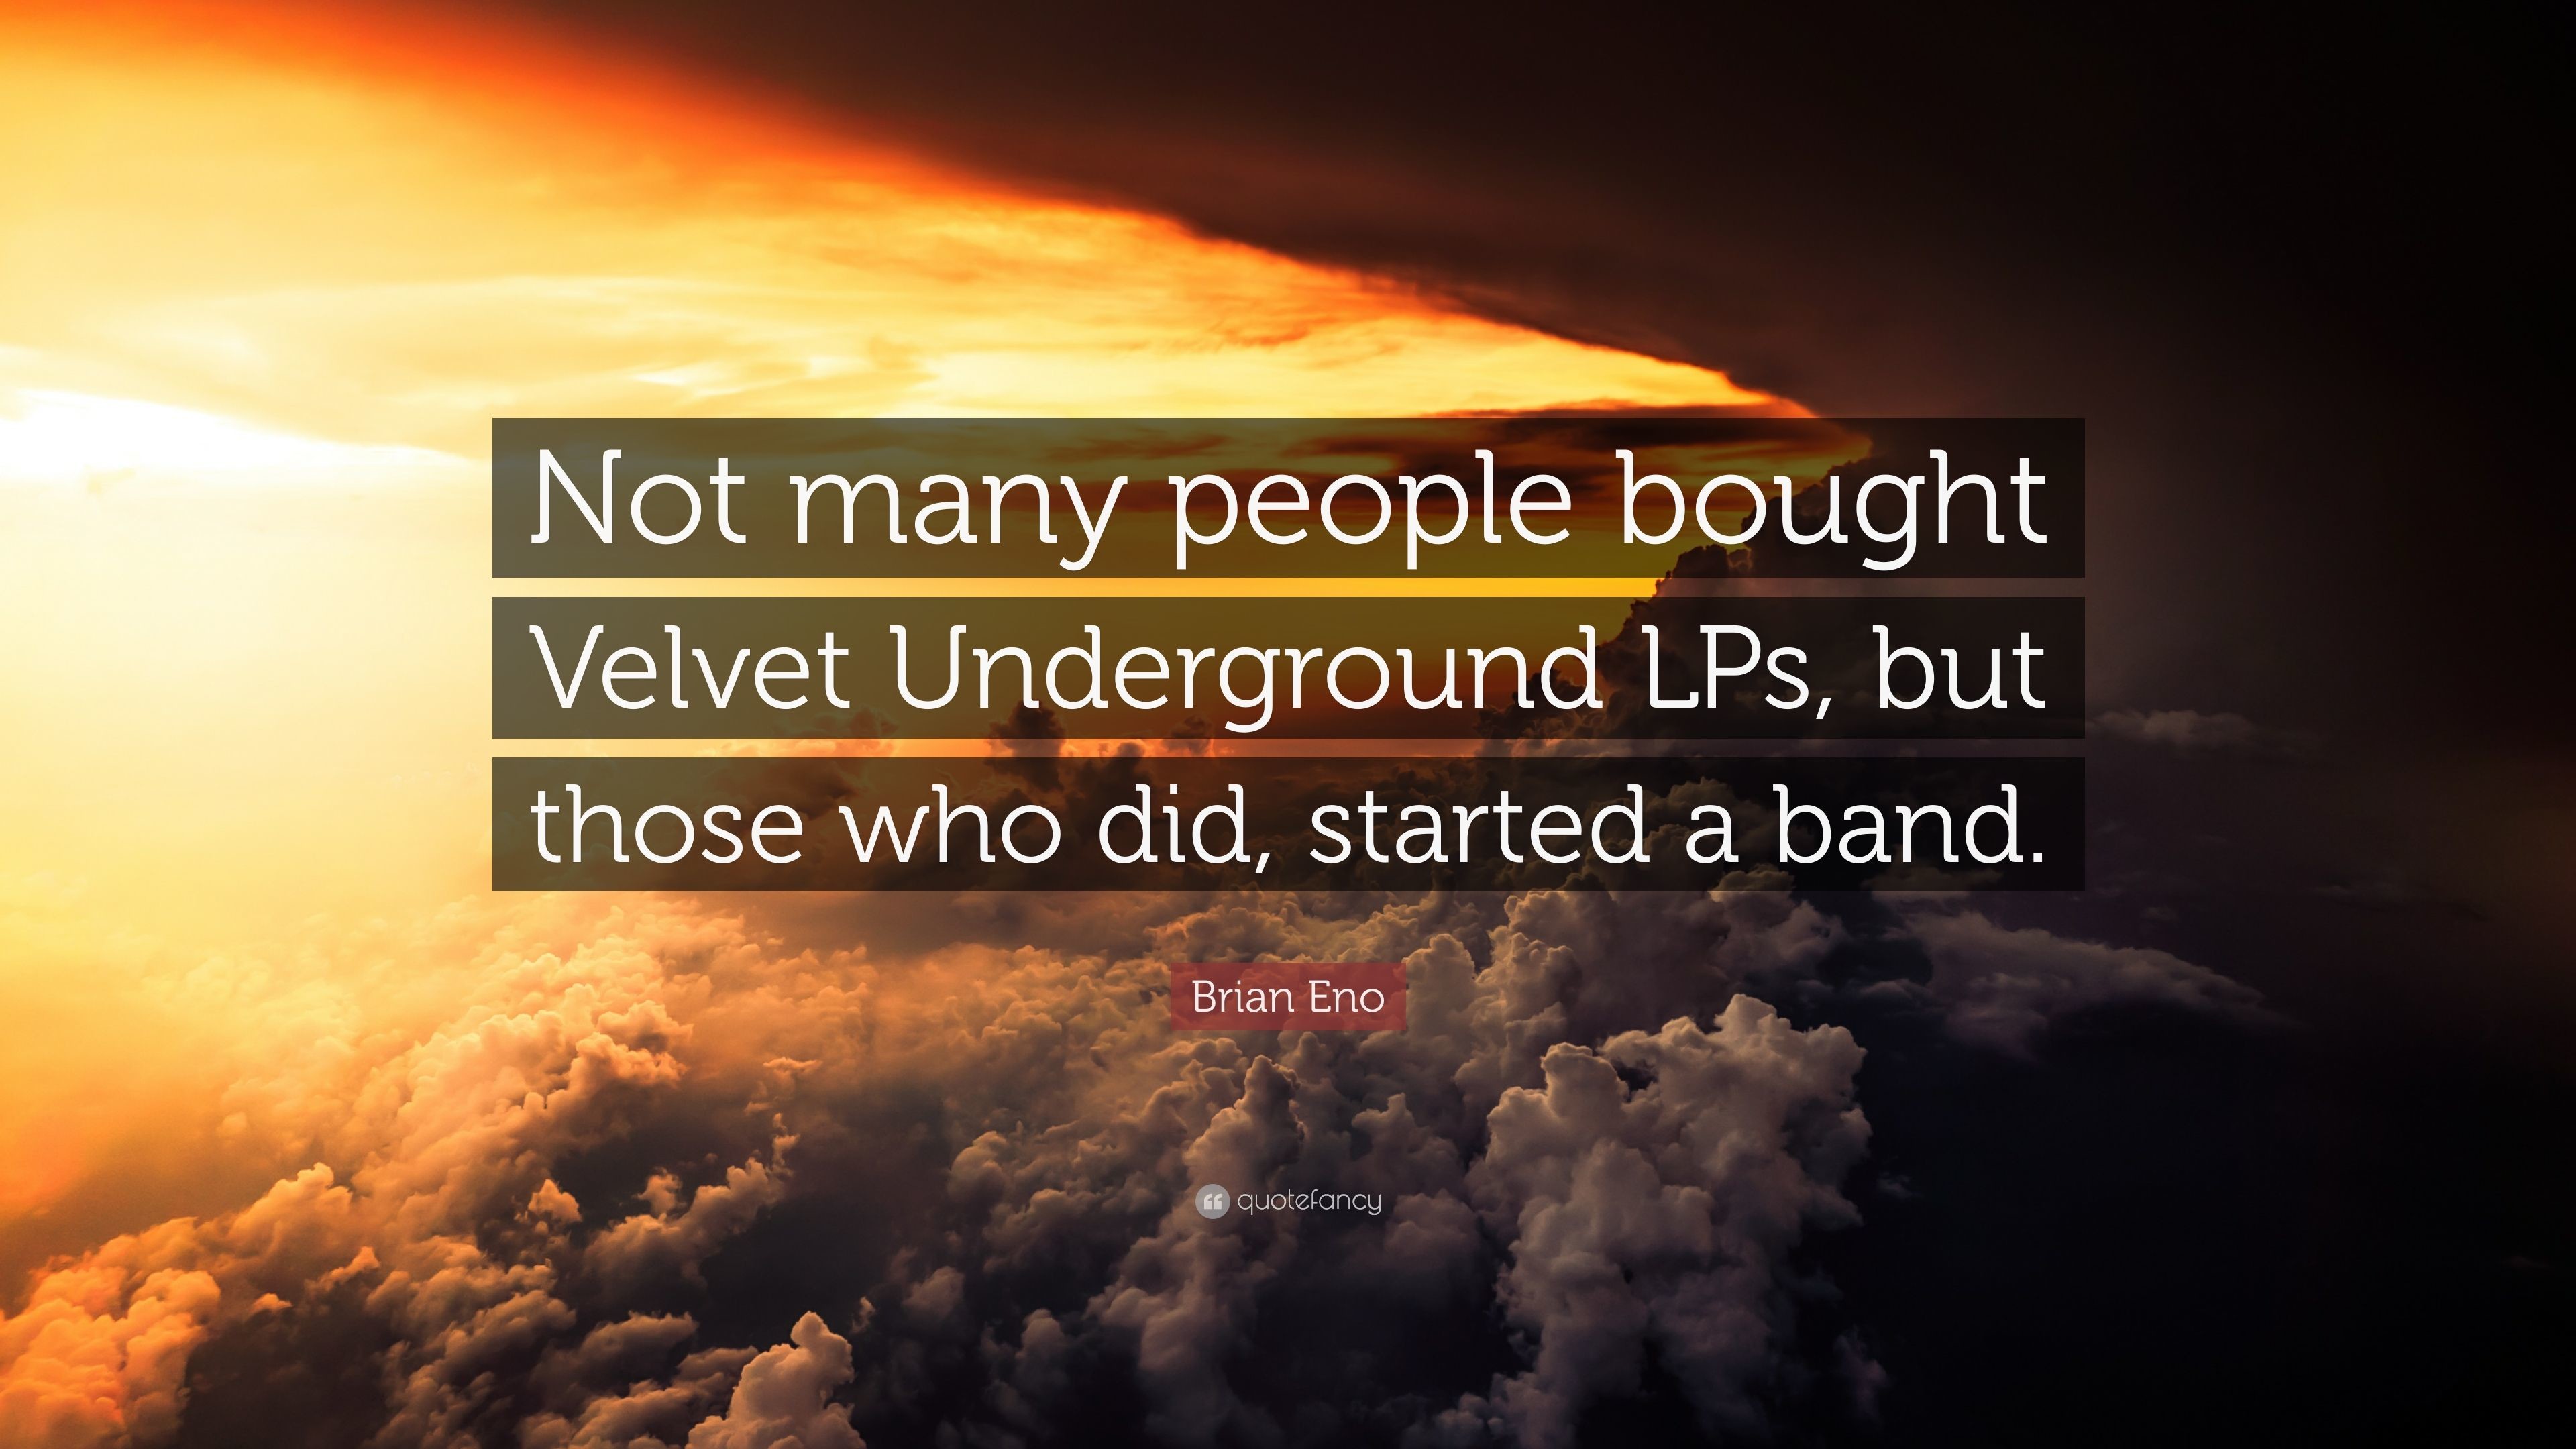 3840x2160 Brian Eno Quote: “Not many people bought Velvet Underground LPs, but those  who